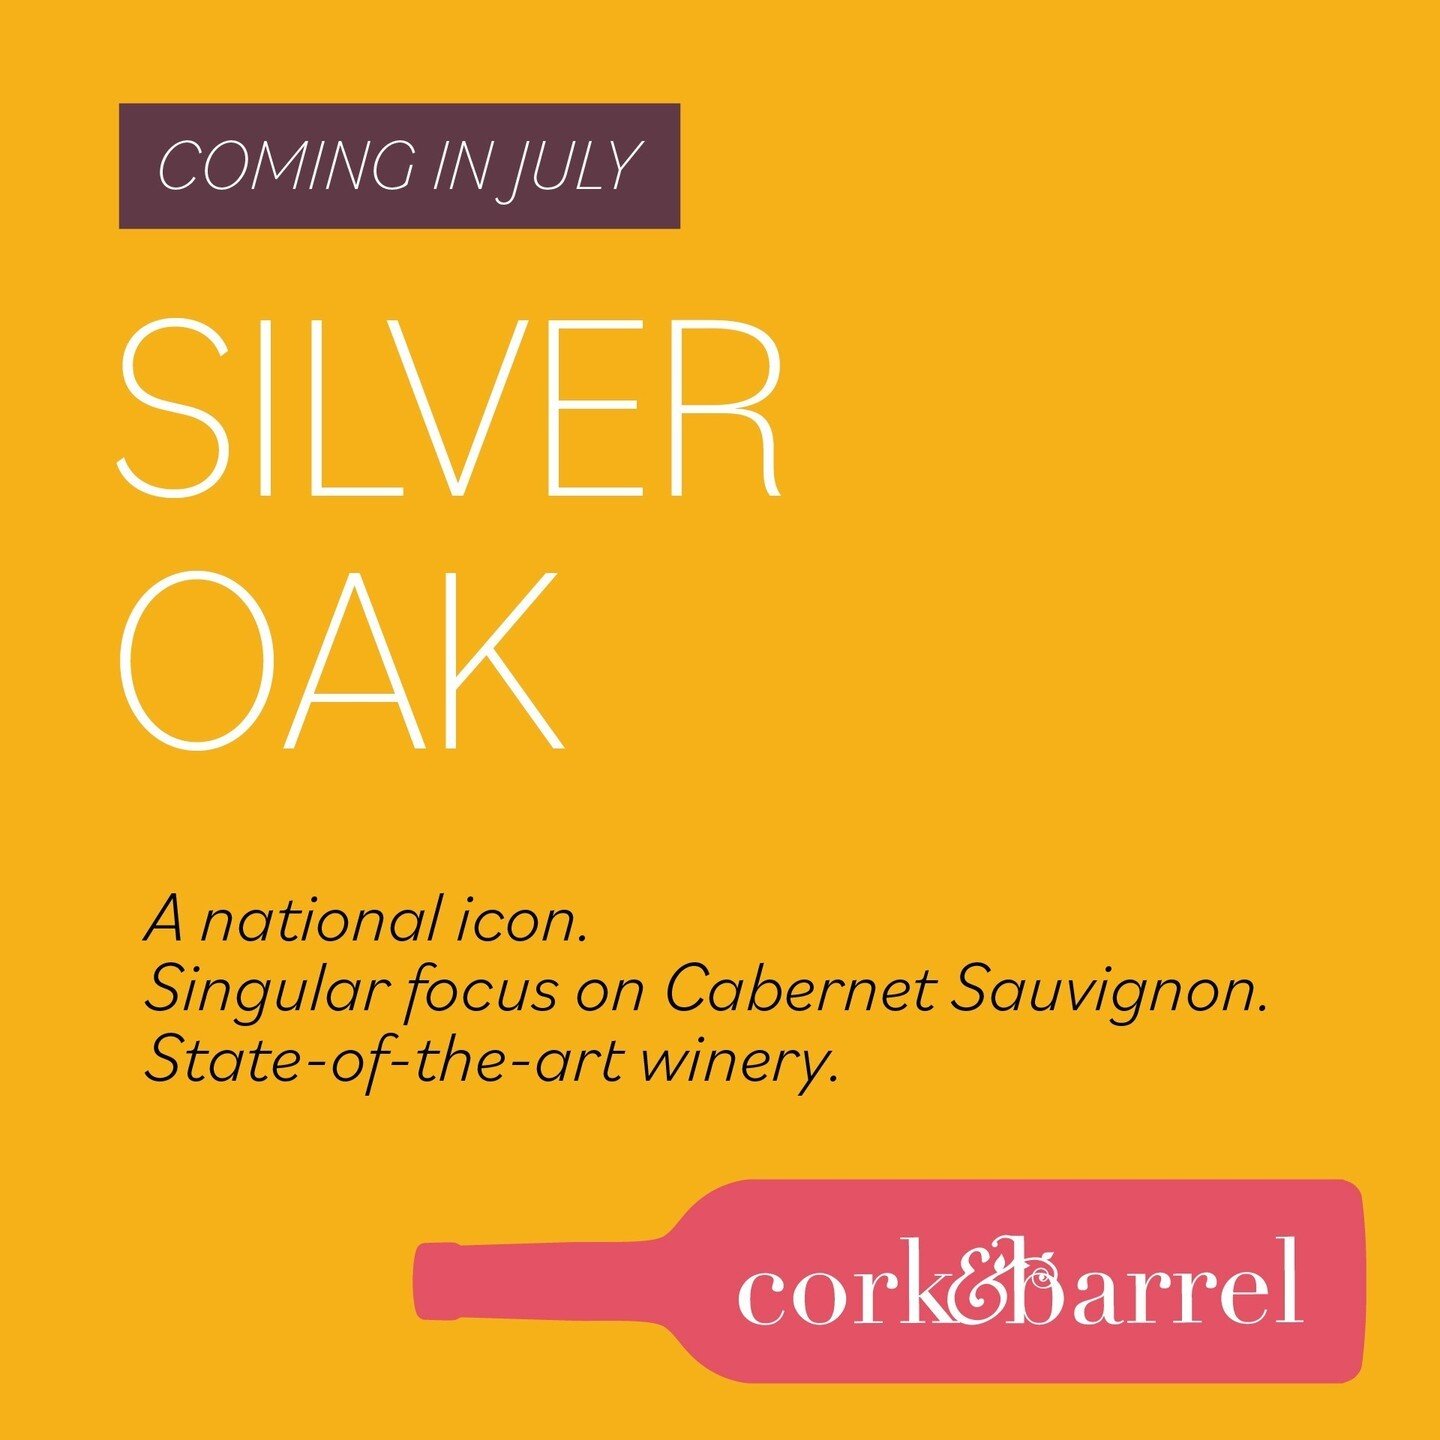 The &quot;OG&quot; of Cabernet Sauvignon is joining us at Cork &amp; Barrel!⁠
⁠
Silver Oak is a national icon...responsible for helping America fall in love with Cabernet!⁠
⁠
Cab is the only wine Silver Oak produces. Their focus has definitely paid o